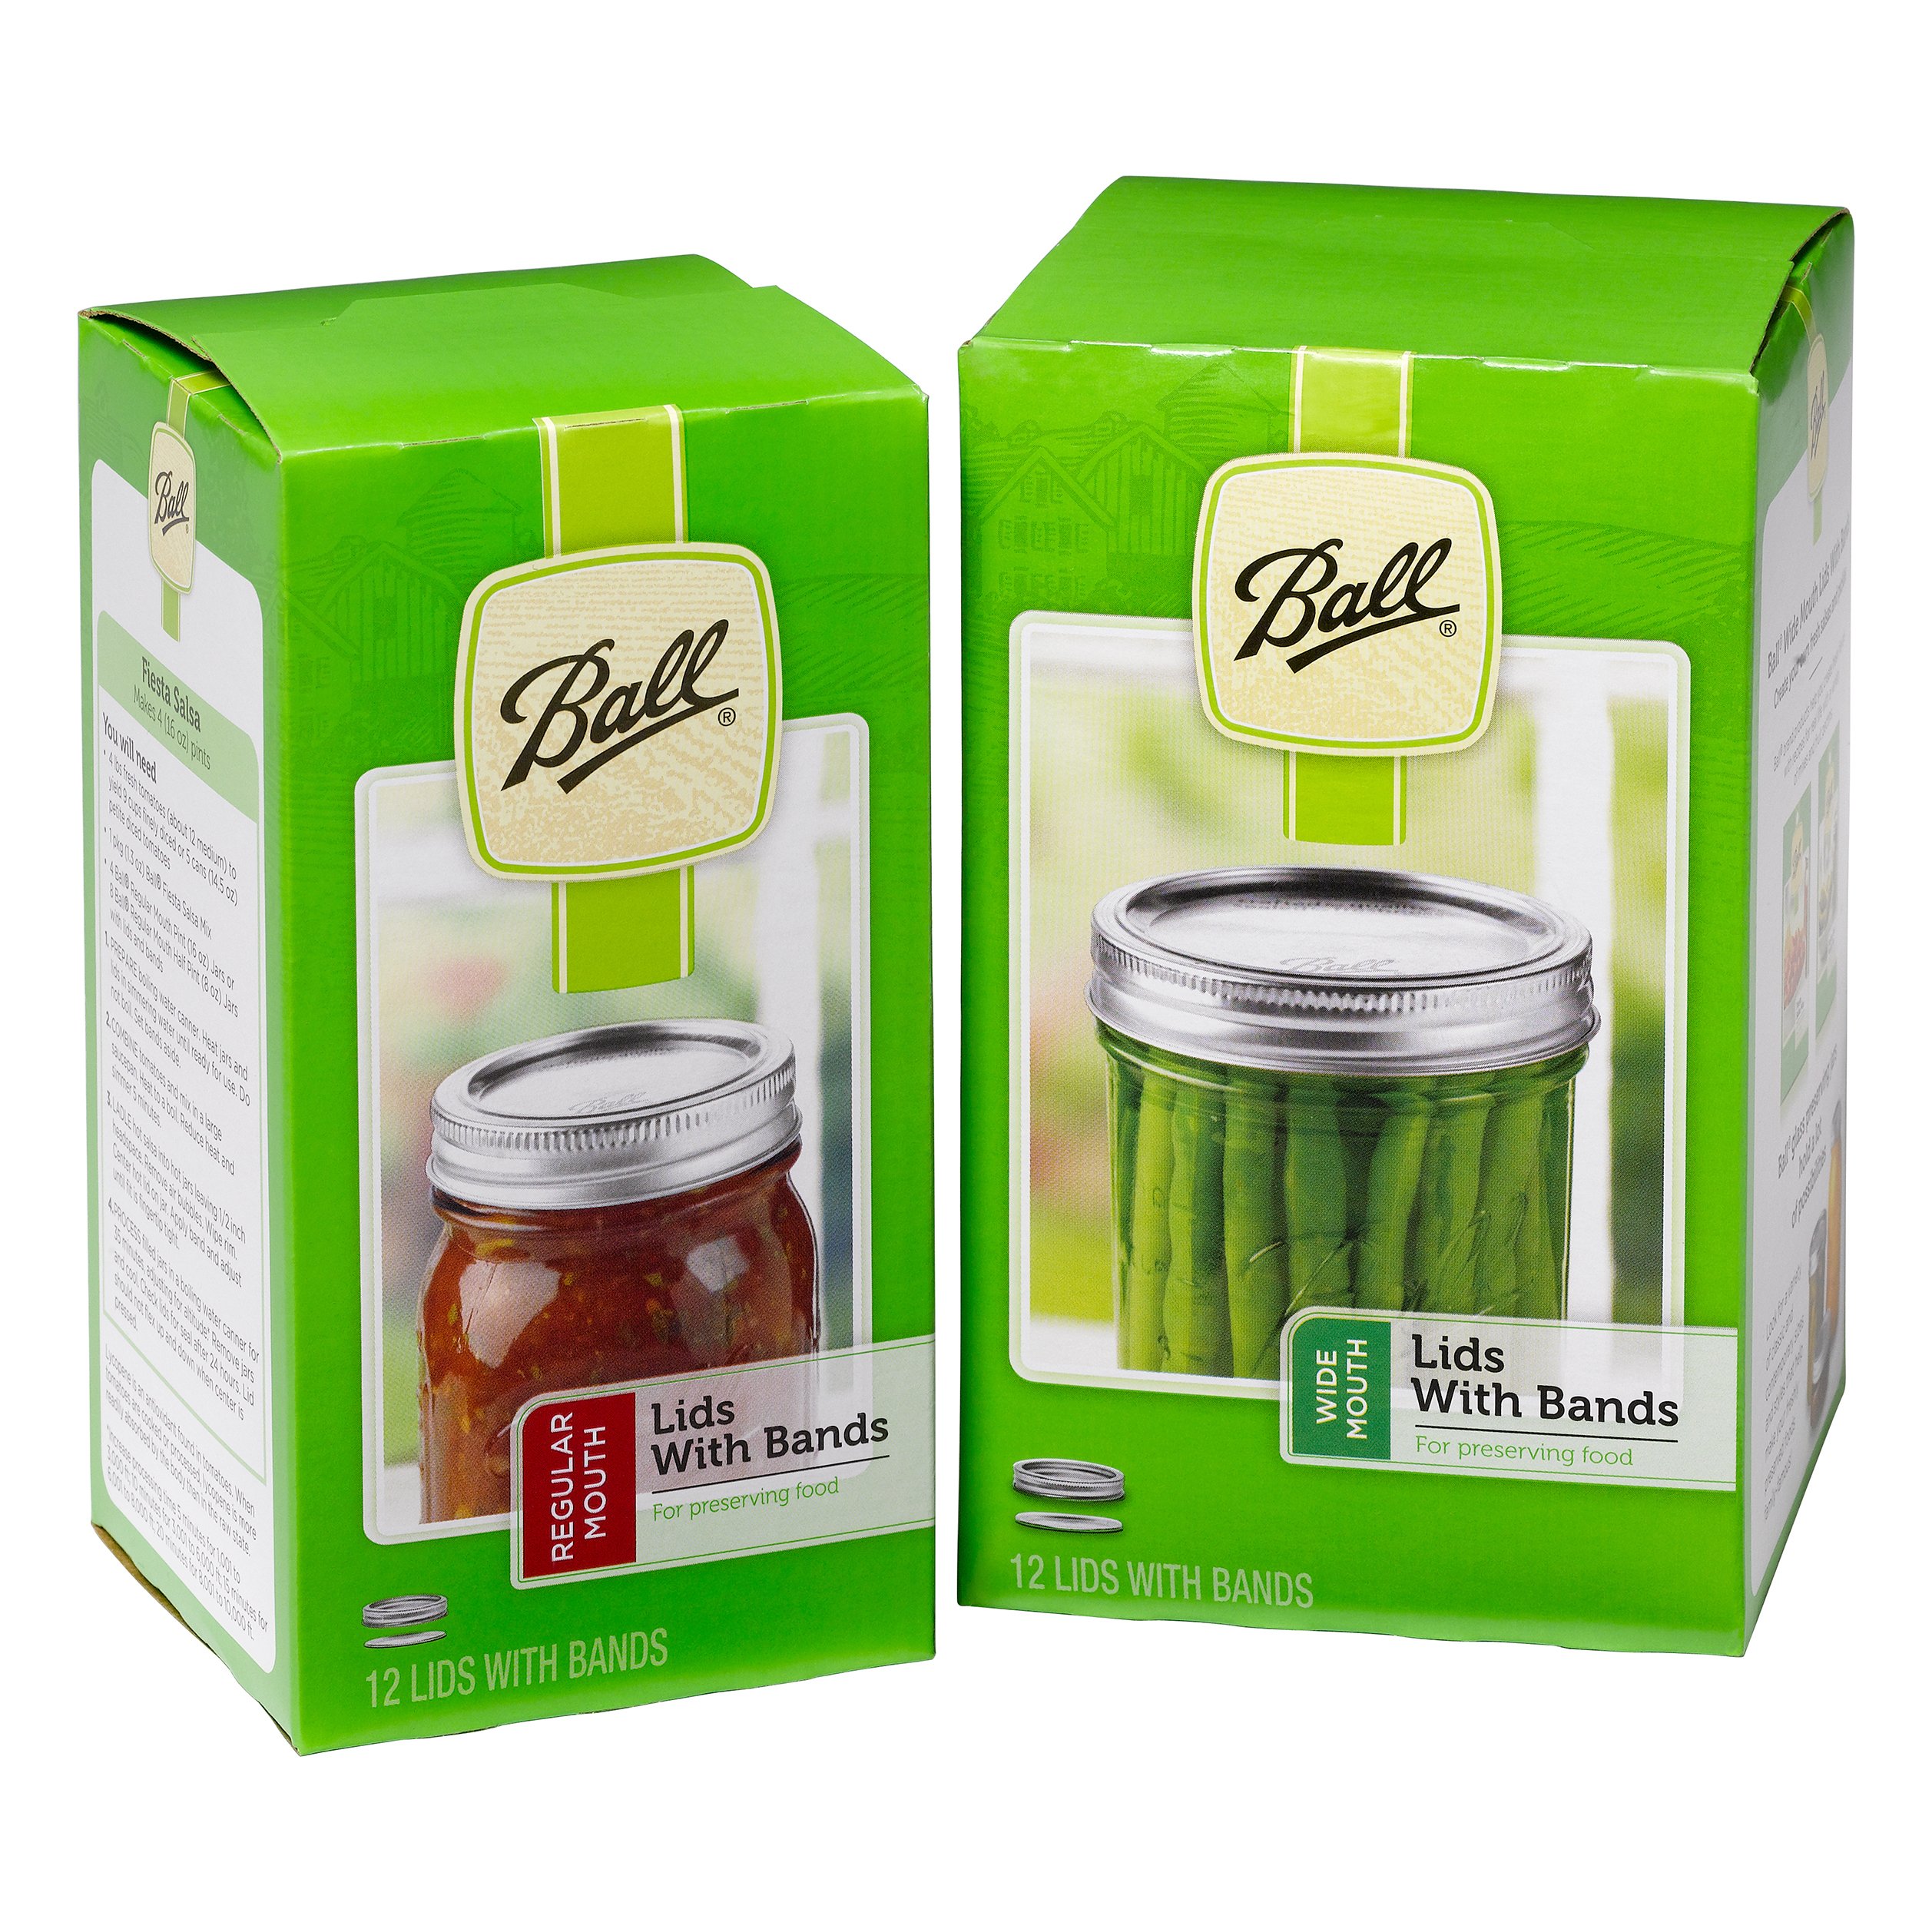  HOMKULA 9 Pieces Canning Supplies, Includes 20